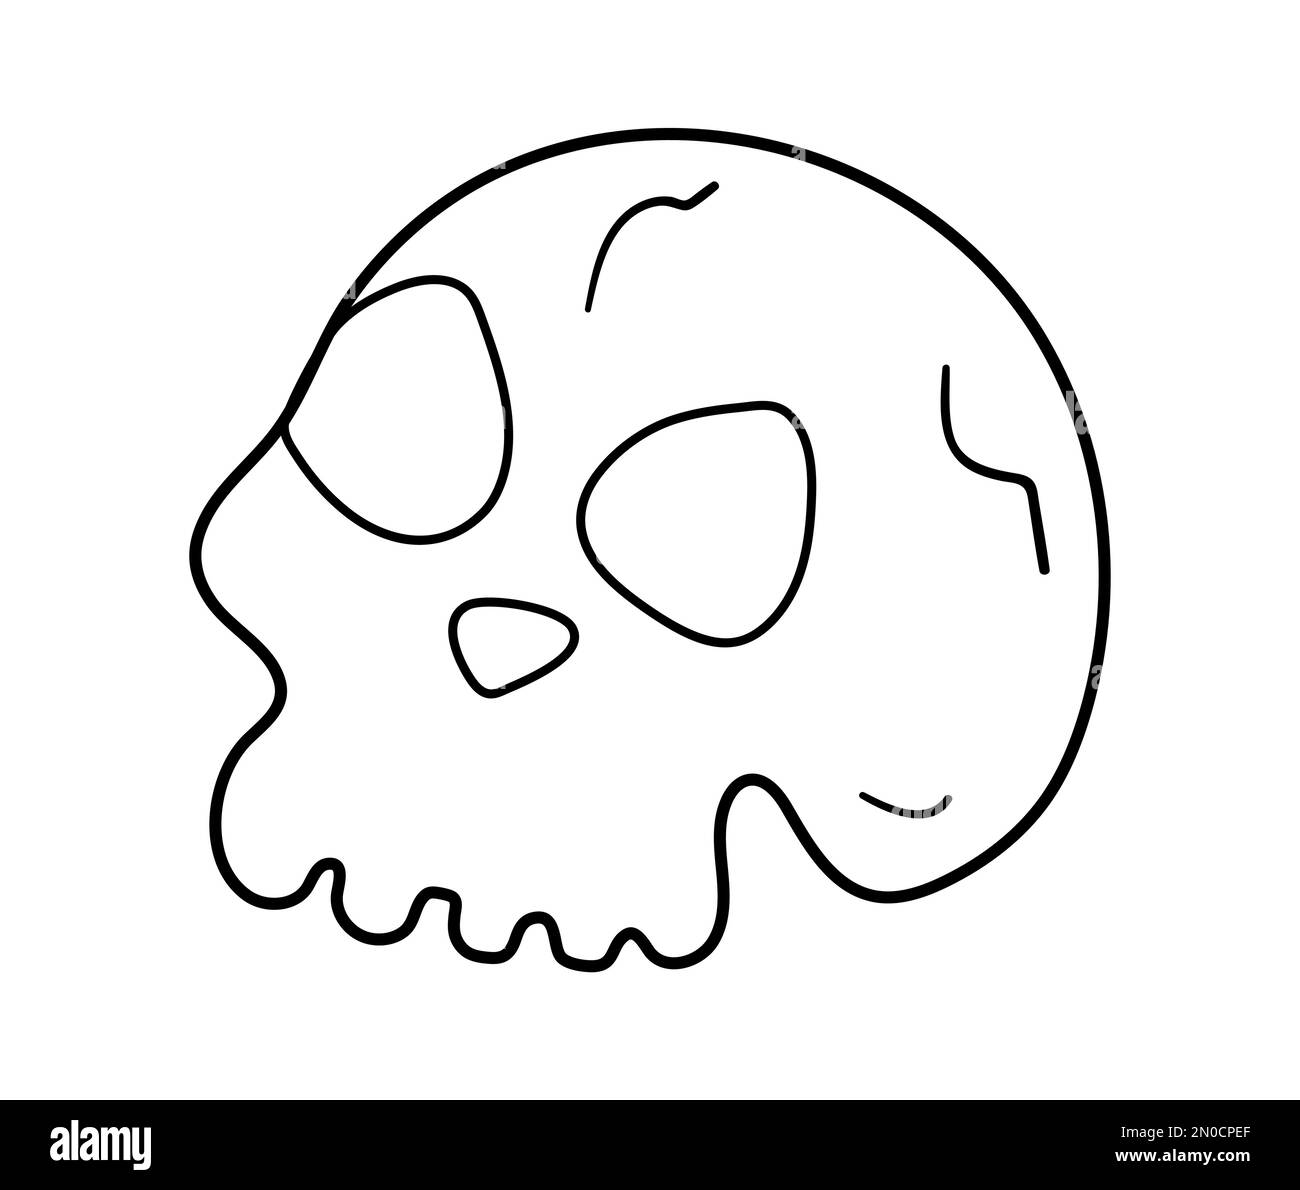 Halloween party illustration with human skull. Vector black and white skeleton.  Scary design for Autumn Samhain party. All saints day coloring page. Stock Vector